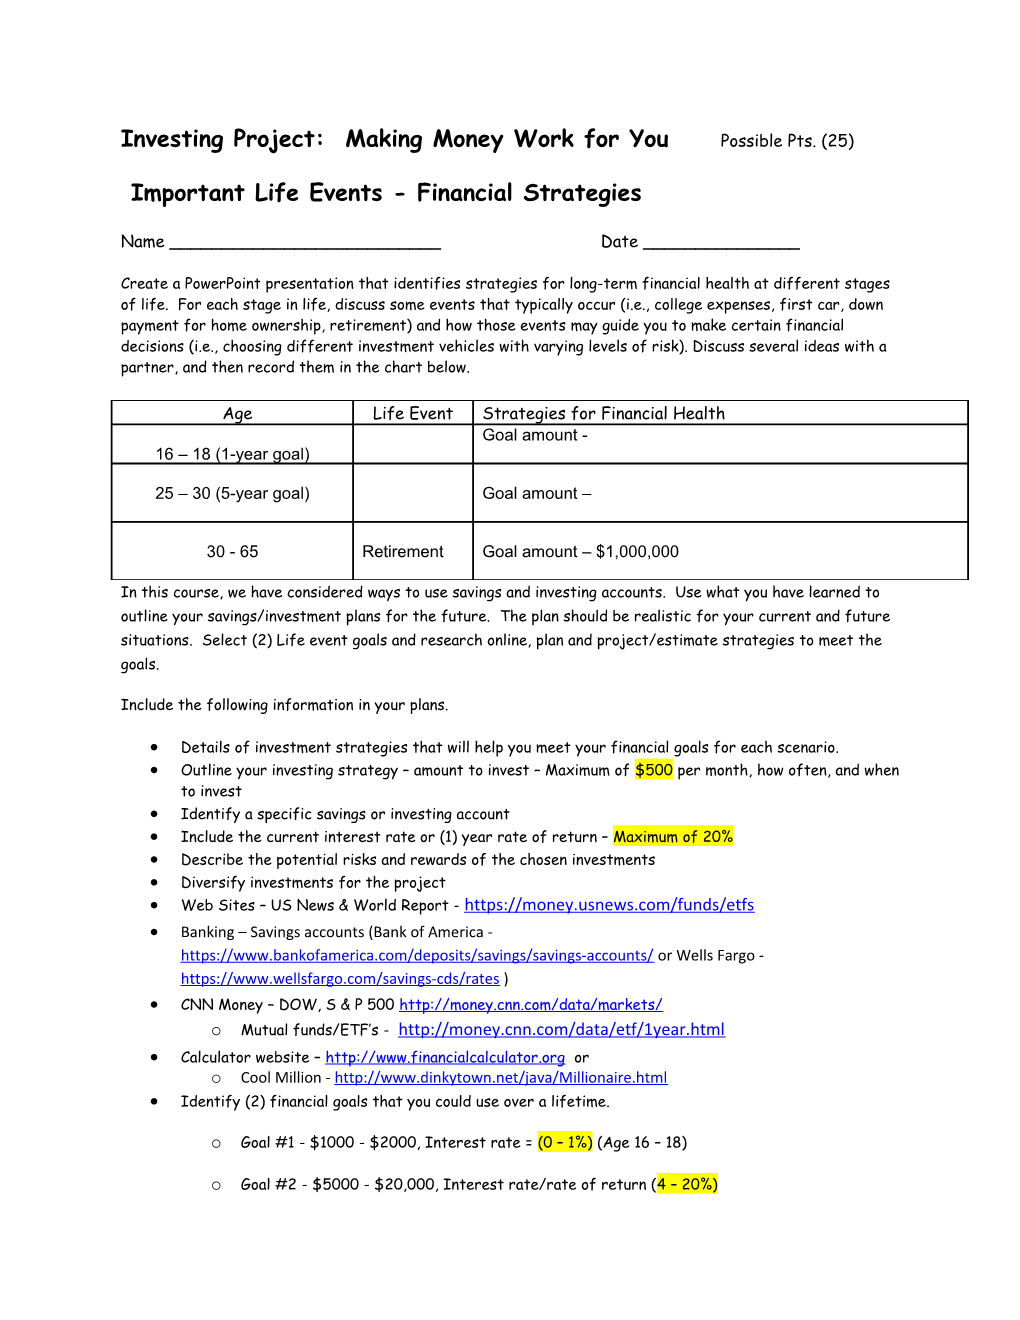 Important Life Events - Financial Strategies